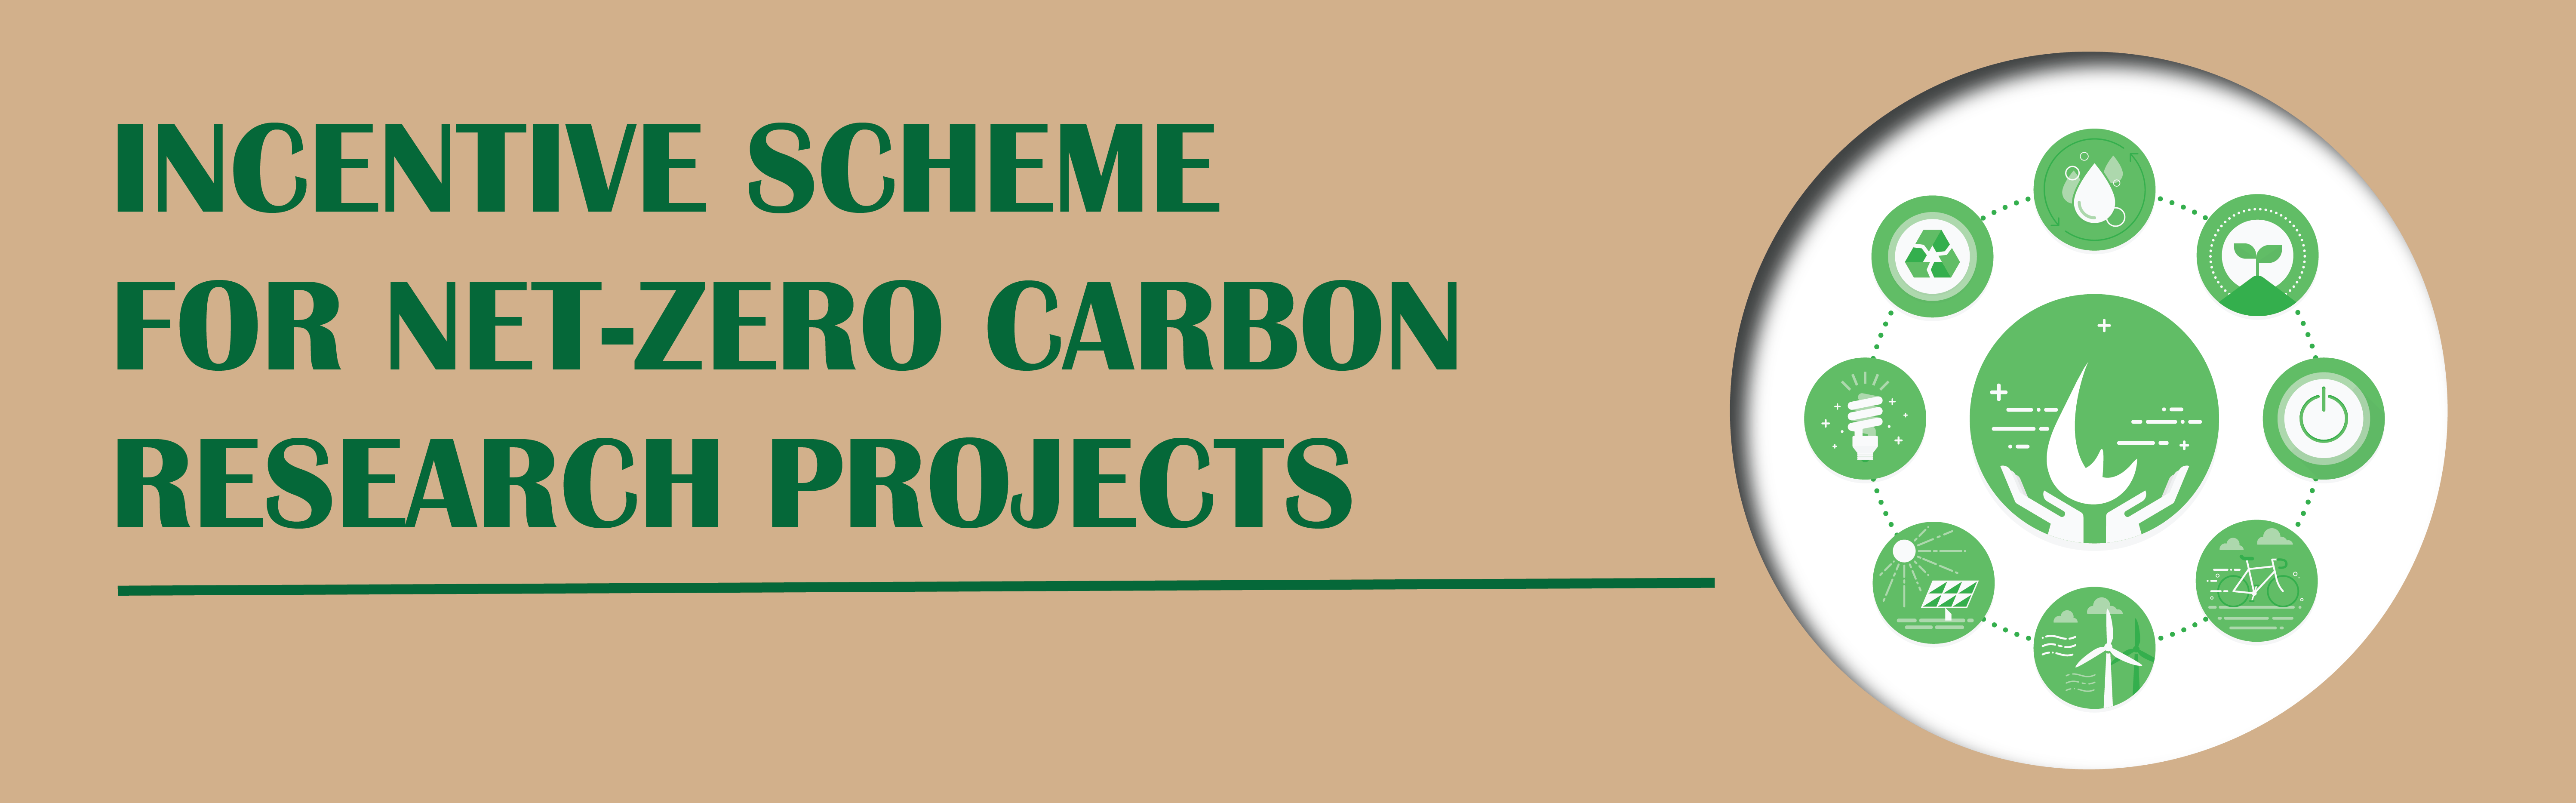 Incentive Scheme for Net-Zero Carbon Research Projects